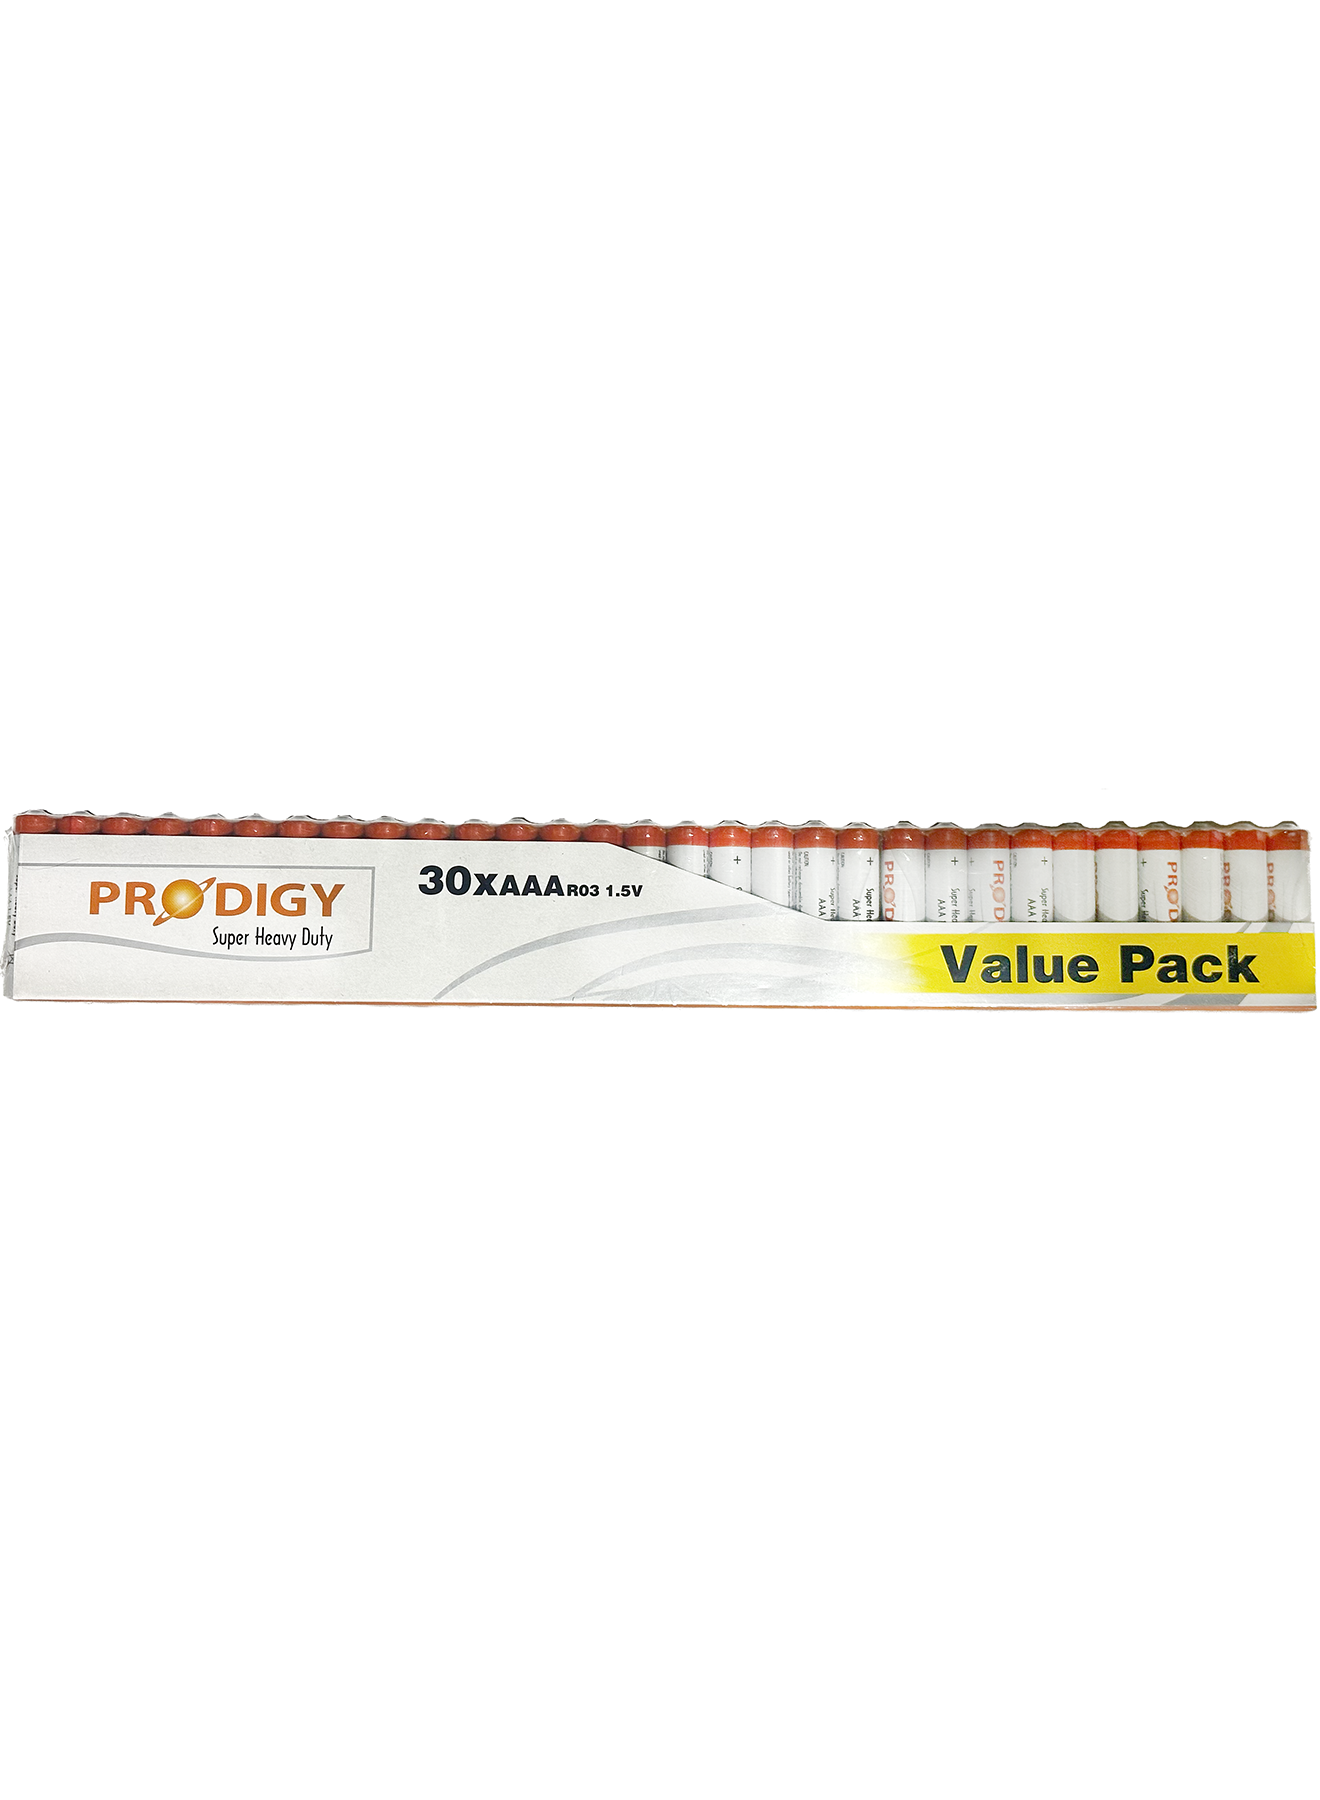 Prodigy S H D R03PVC 15V AAA30 Value Pack of 4 